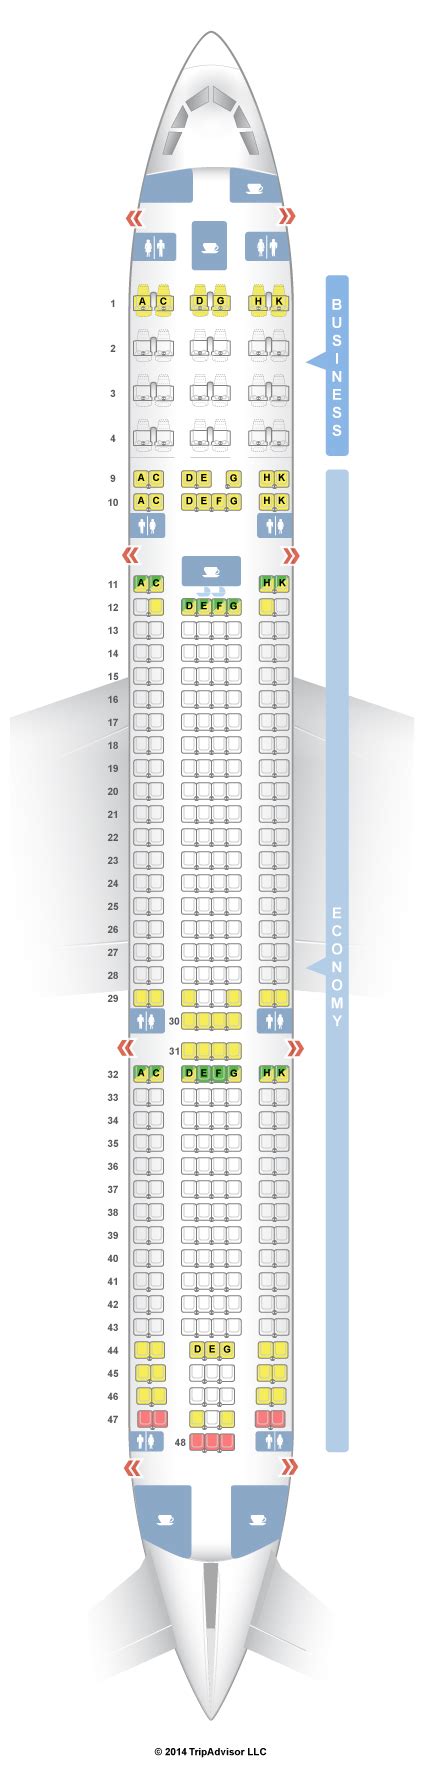 A330 200 Aer Lingus Seat Map